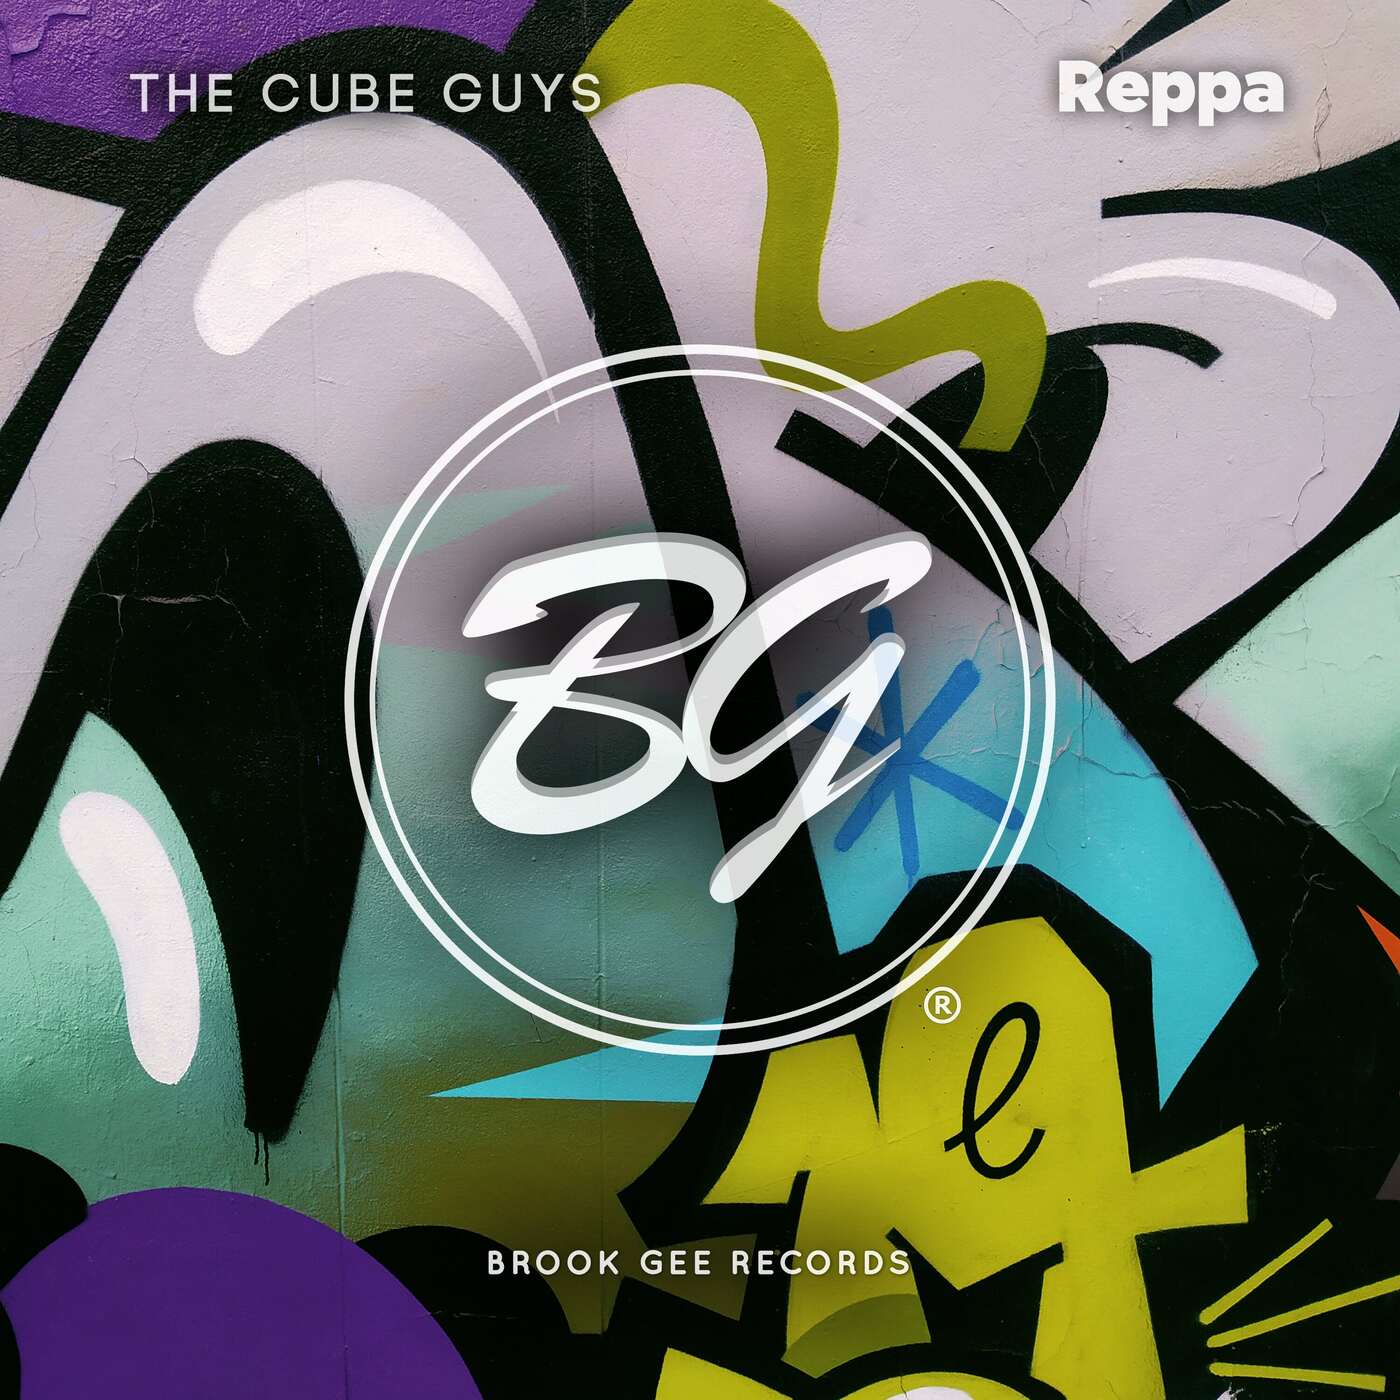 Australian label Brook Gee Records presents "Reppa", by Italian heavyweights The Cube Guys